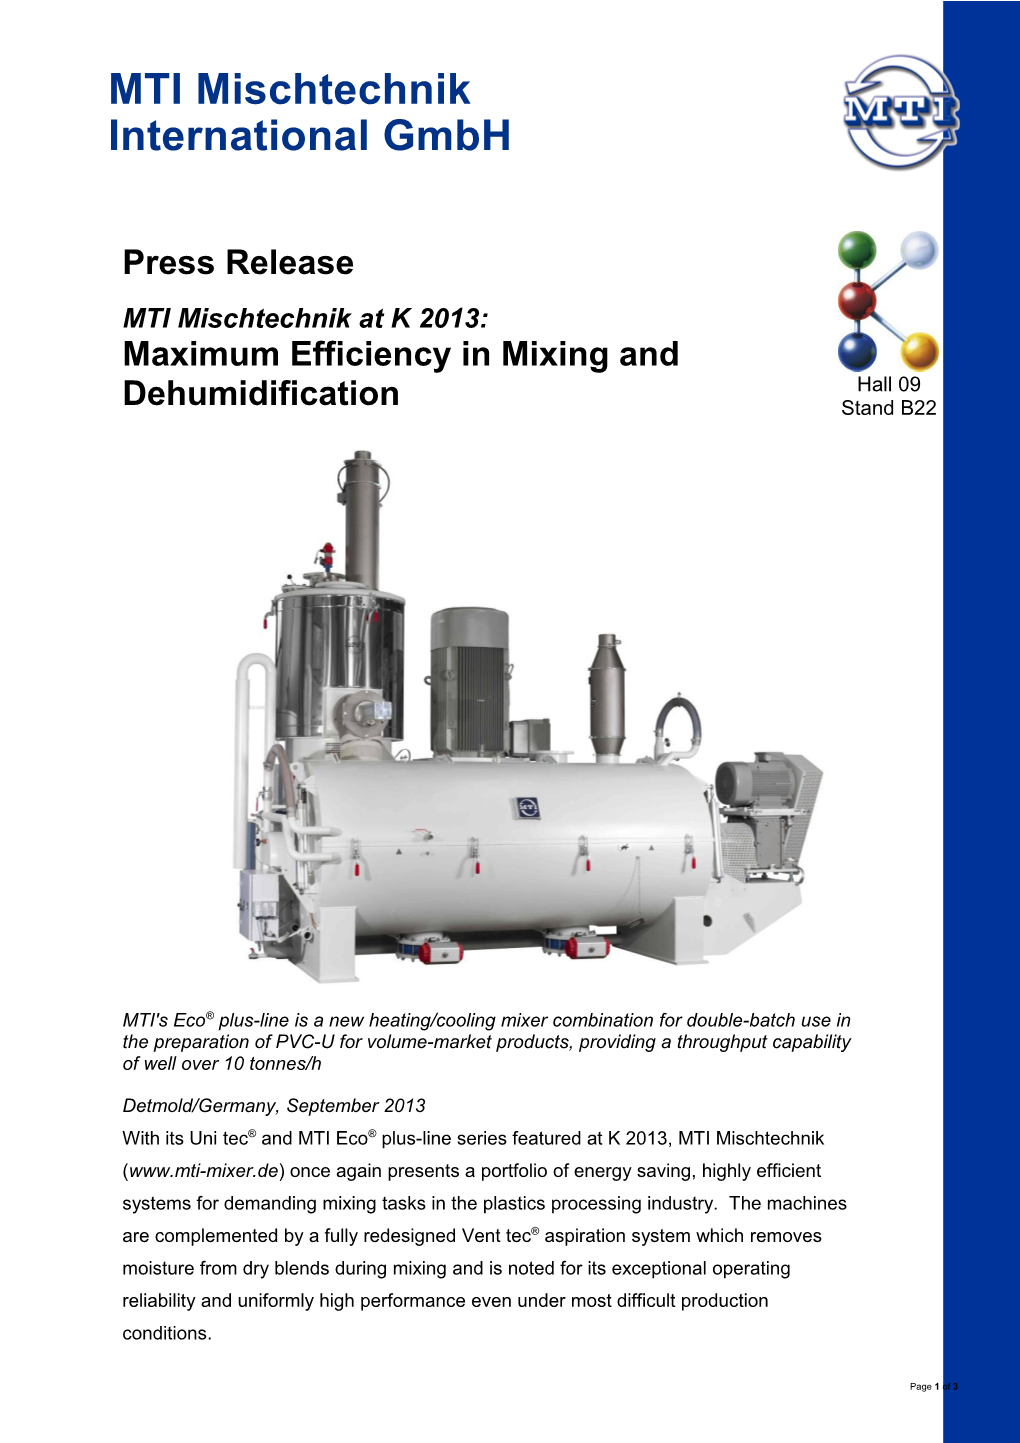 MTI's Eco Plus-Line Is a New Heating/Cooling Mixer Combination for Double-Batch Use In